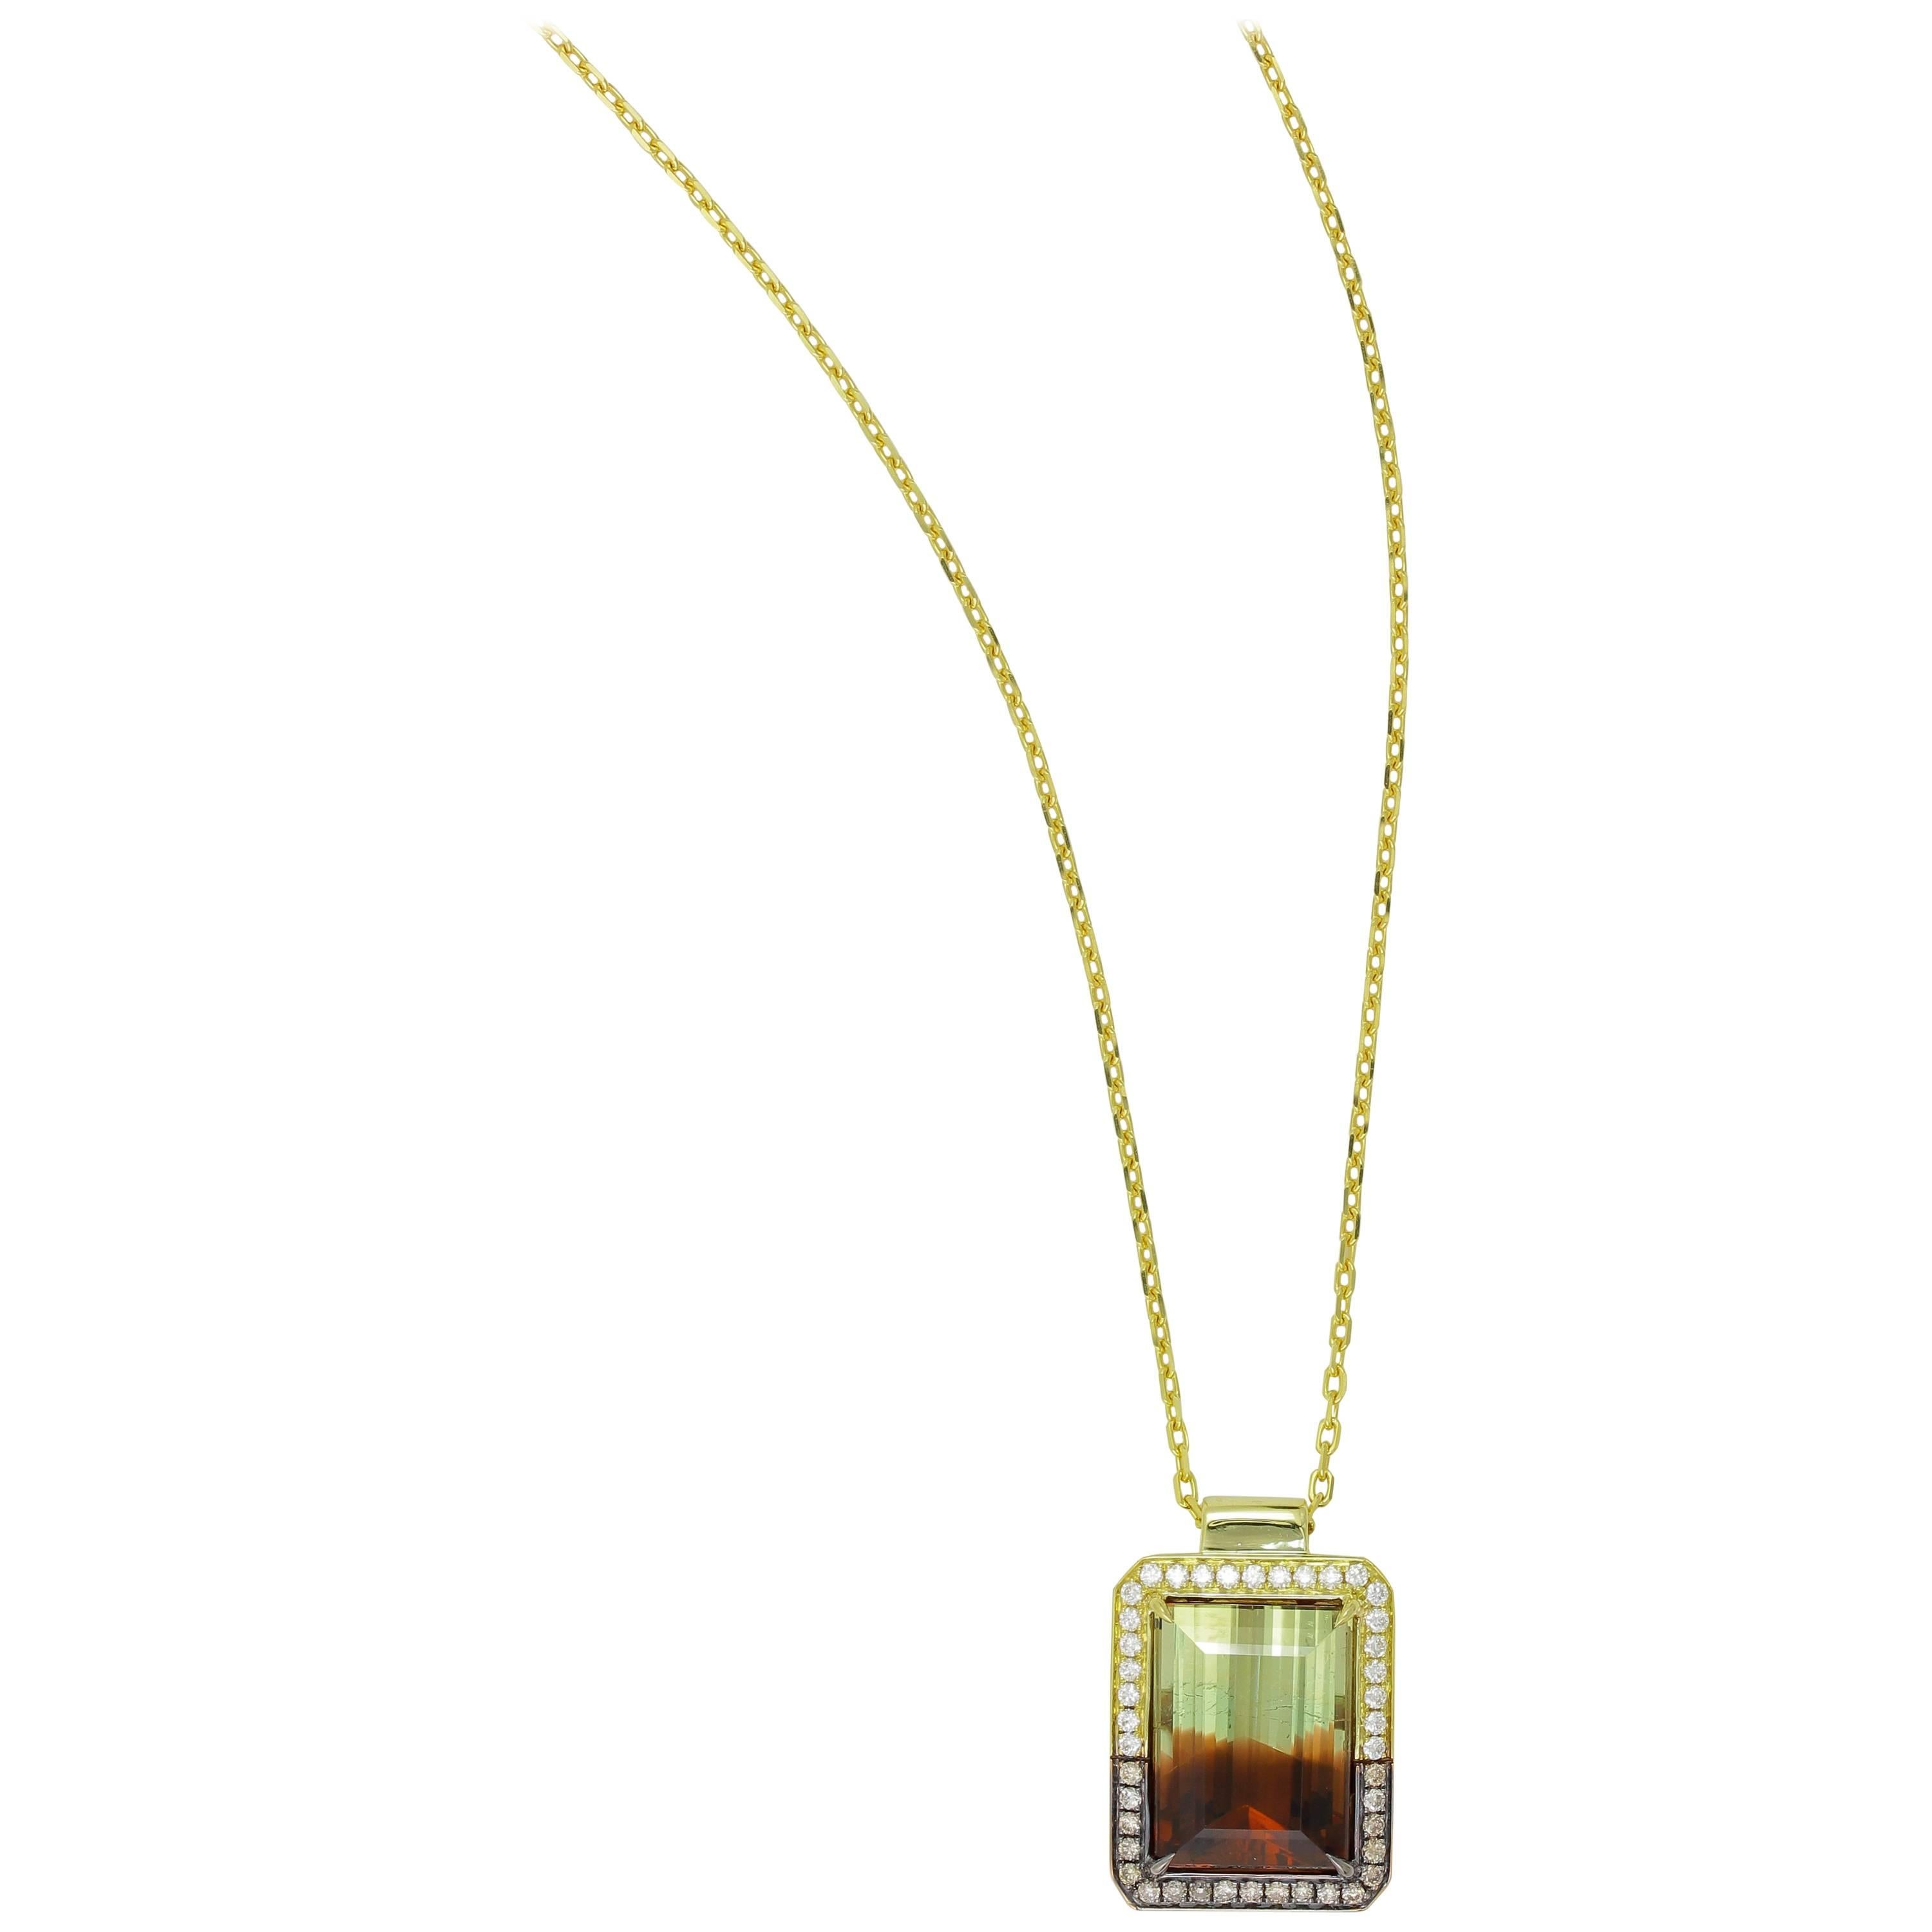 18K YPG EC BICOLOR TOURMALINE WITH YG WHITE DIAMOND TOP AND PG BROWN DIAMOND BOTTOM WITH POLISHED YG BALE ONE-OF-A-KIND PENDANT WITH CHAIN 
BC TOURM 10.39 CT
19 BROWN DIA 0.15 Carats  23 Diamonds  0.17 Carats